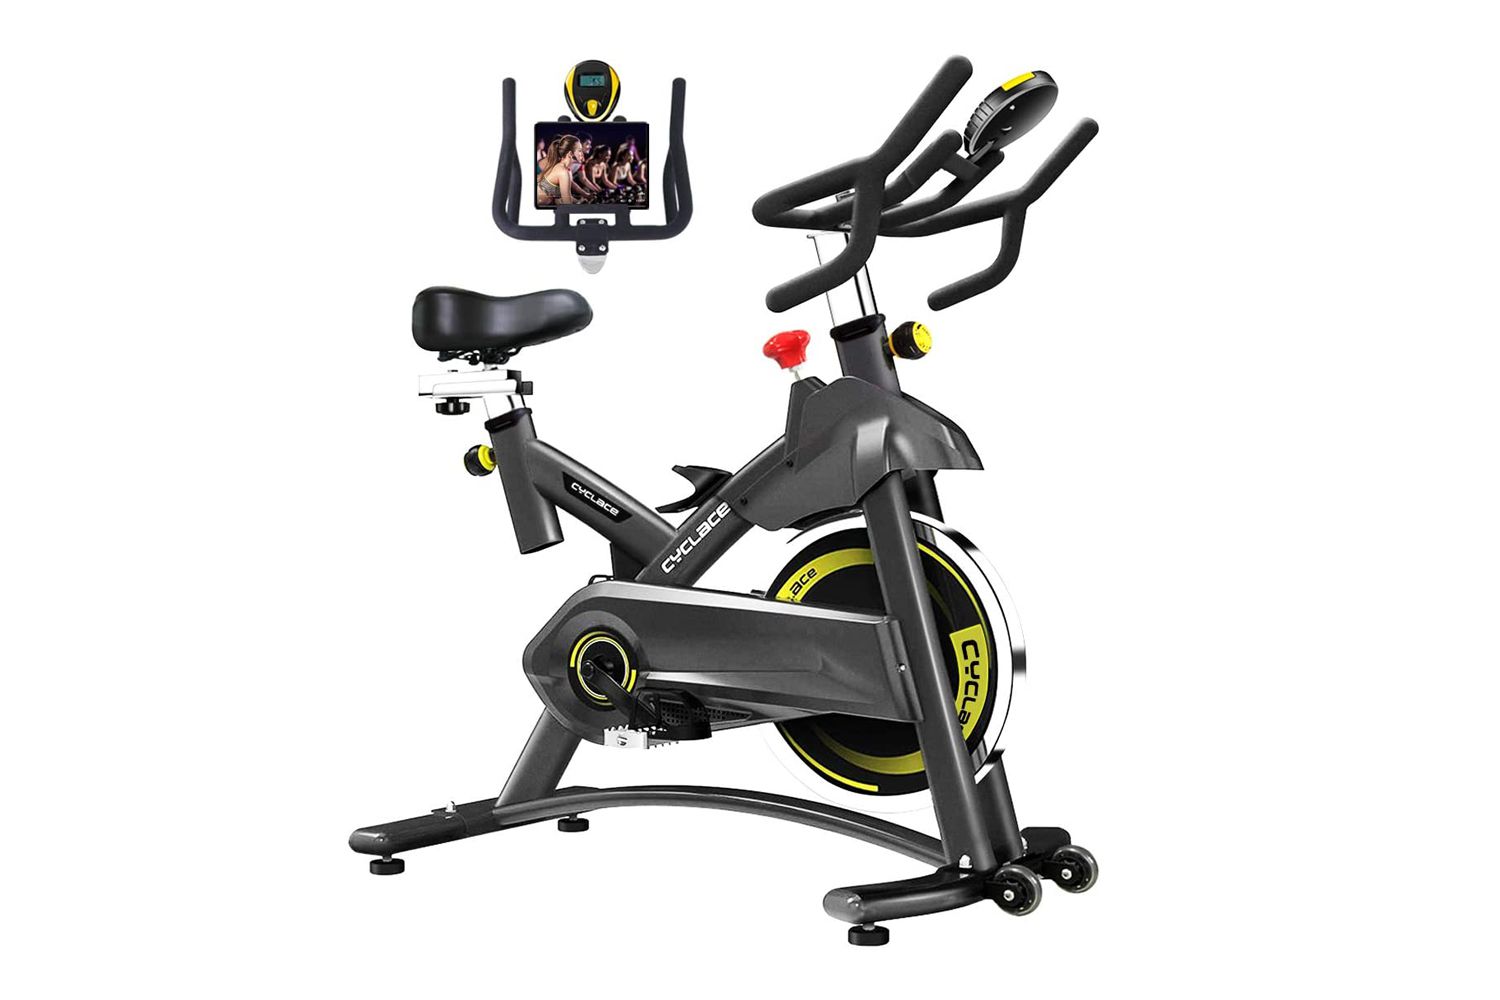 Cyclace Exercise Bike Stationary Review: A Budget-Friendly Fitness Companion